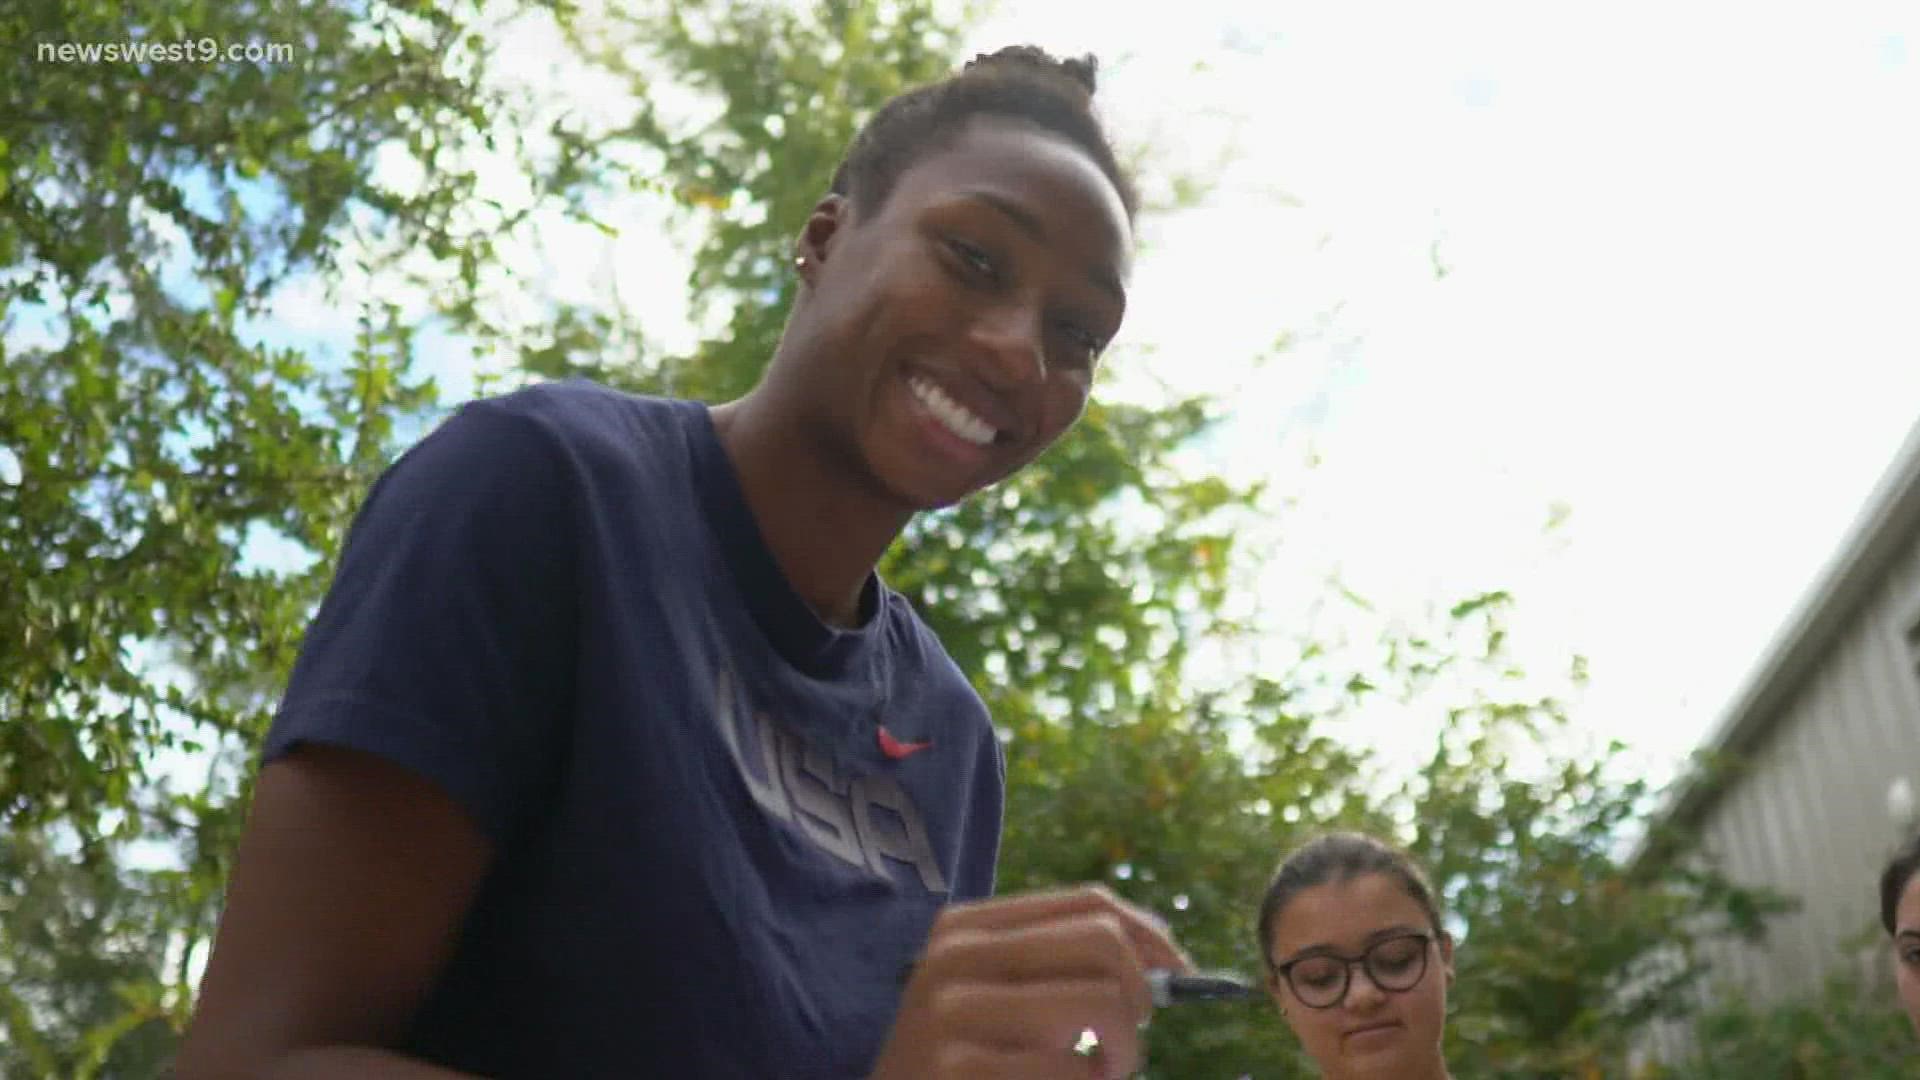 Midland native Natalie Hinds goes back to where it all started at COM Aquatics and shares her knowledge on what it takes to become an Olympian